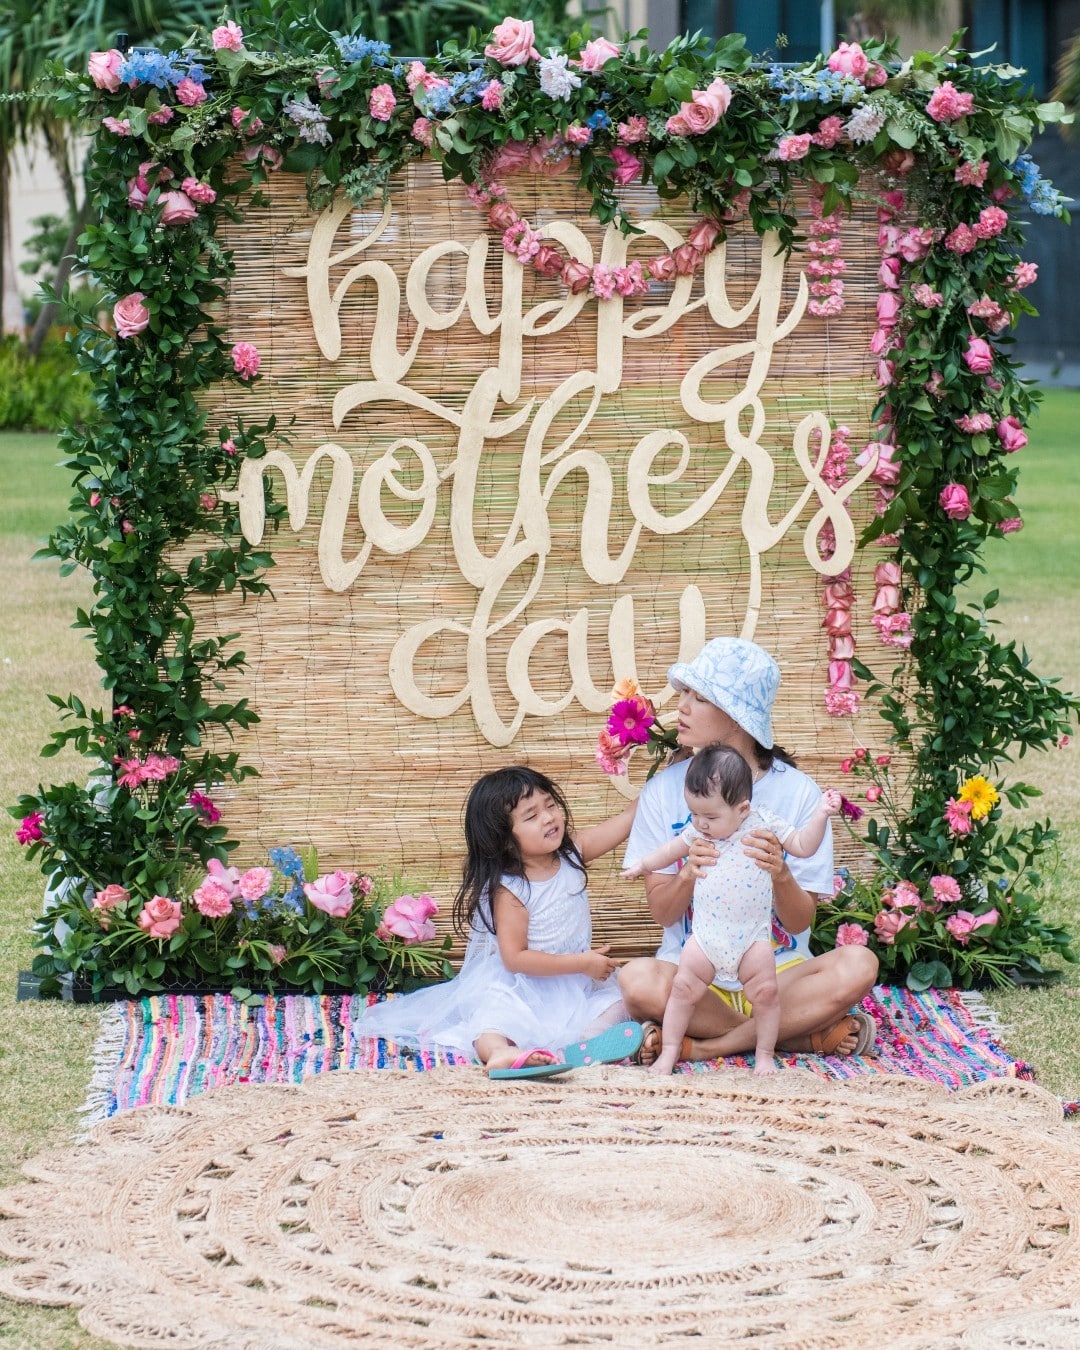 Join us from 9am – 11am on Saturday, May 13 at Victoria Ward Park for a Mother’s Day celebration! Enjoy complimentary treats from Ali‘i Coffee and Holey Grail Donuts, a floral art wall by SF Fleur, and custom cards by Juniper Calligraphy, while supplies last.